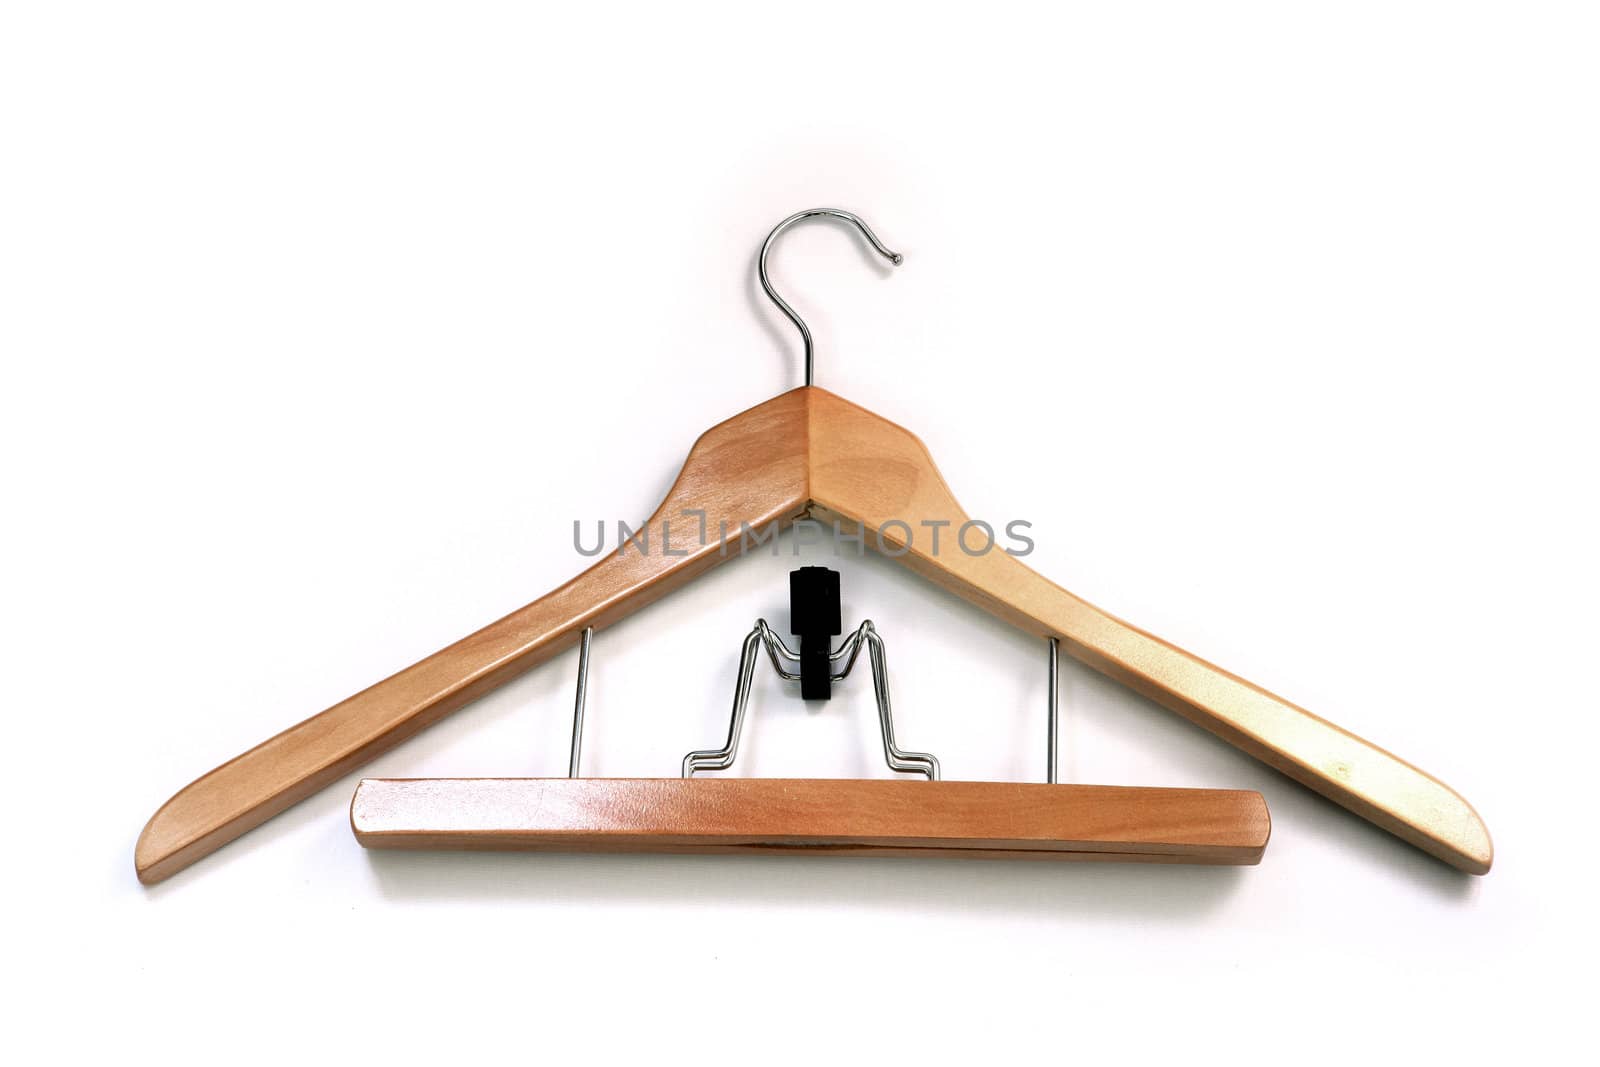 Wooden coathanger by phovoir